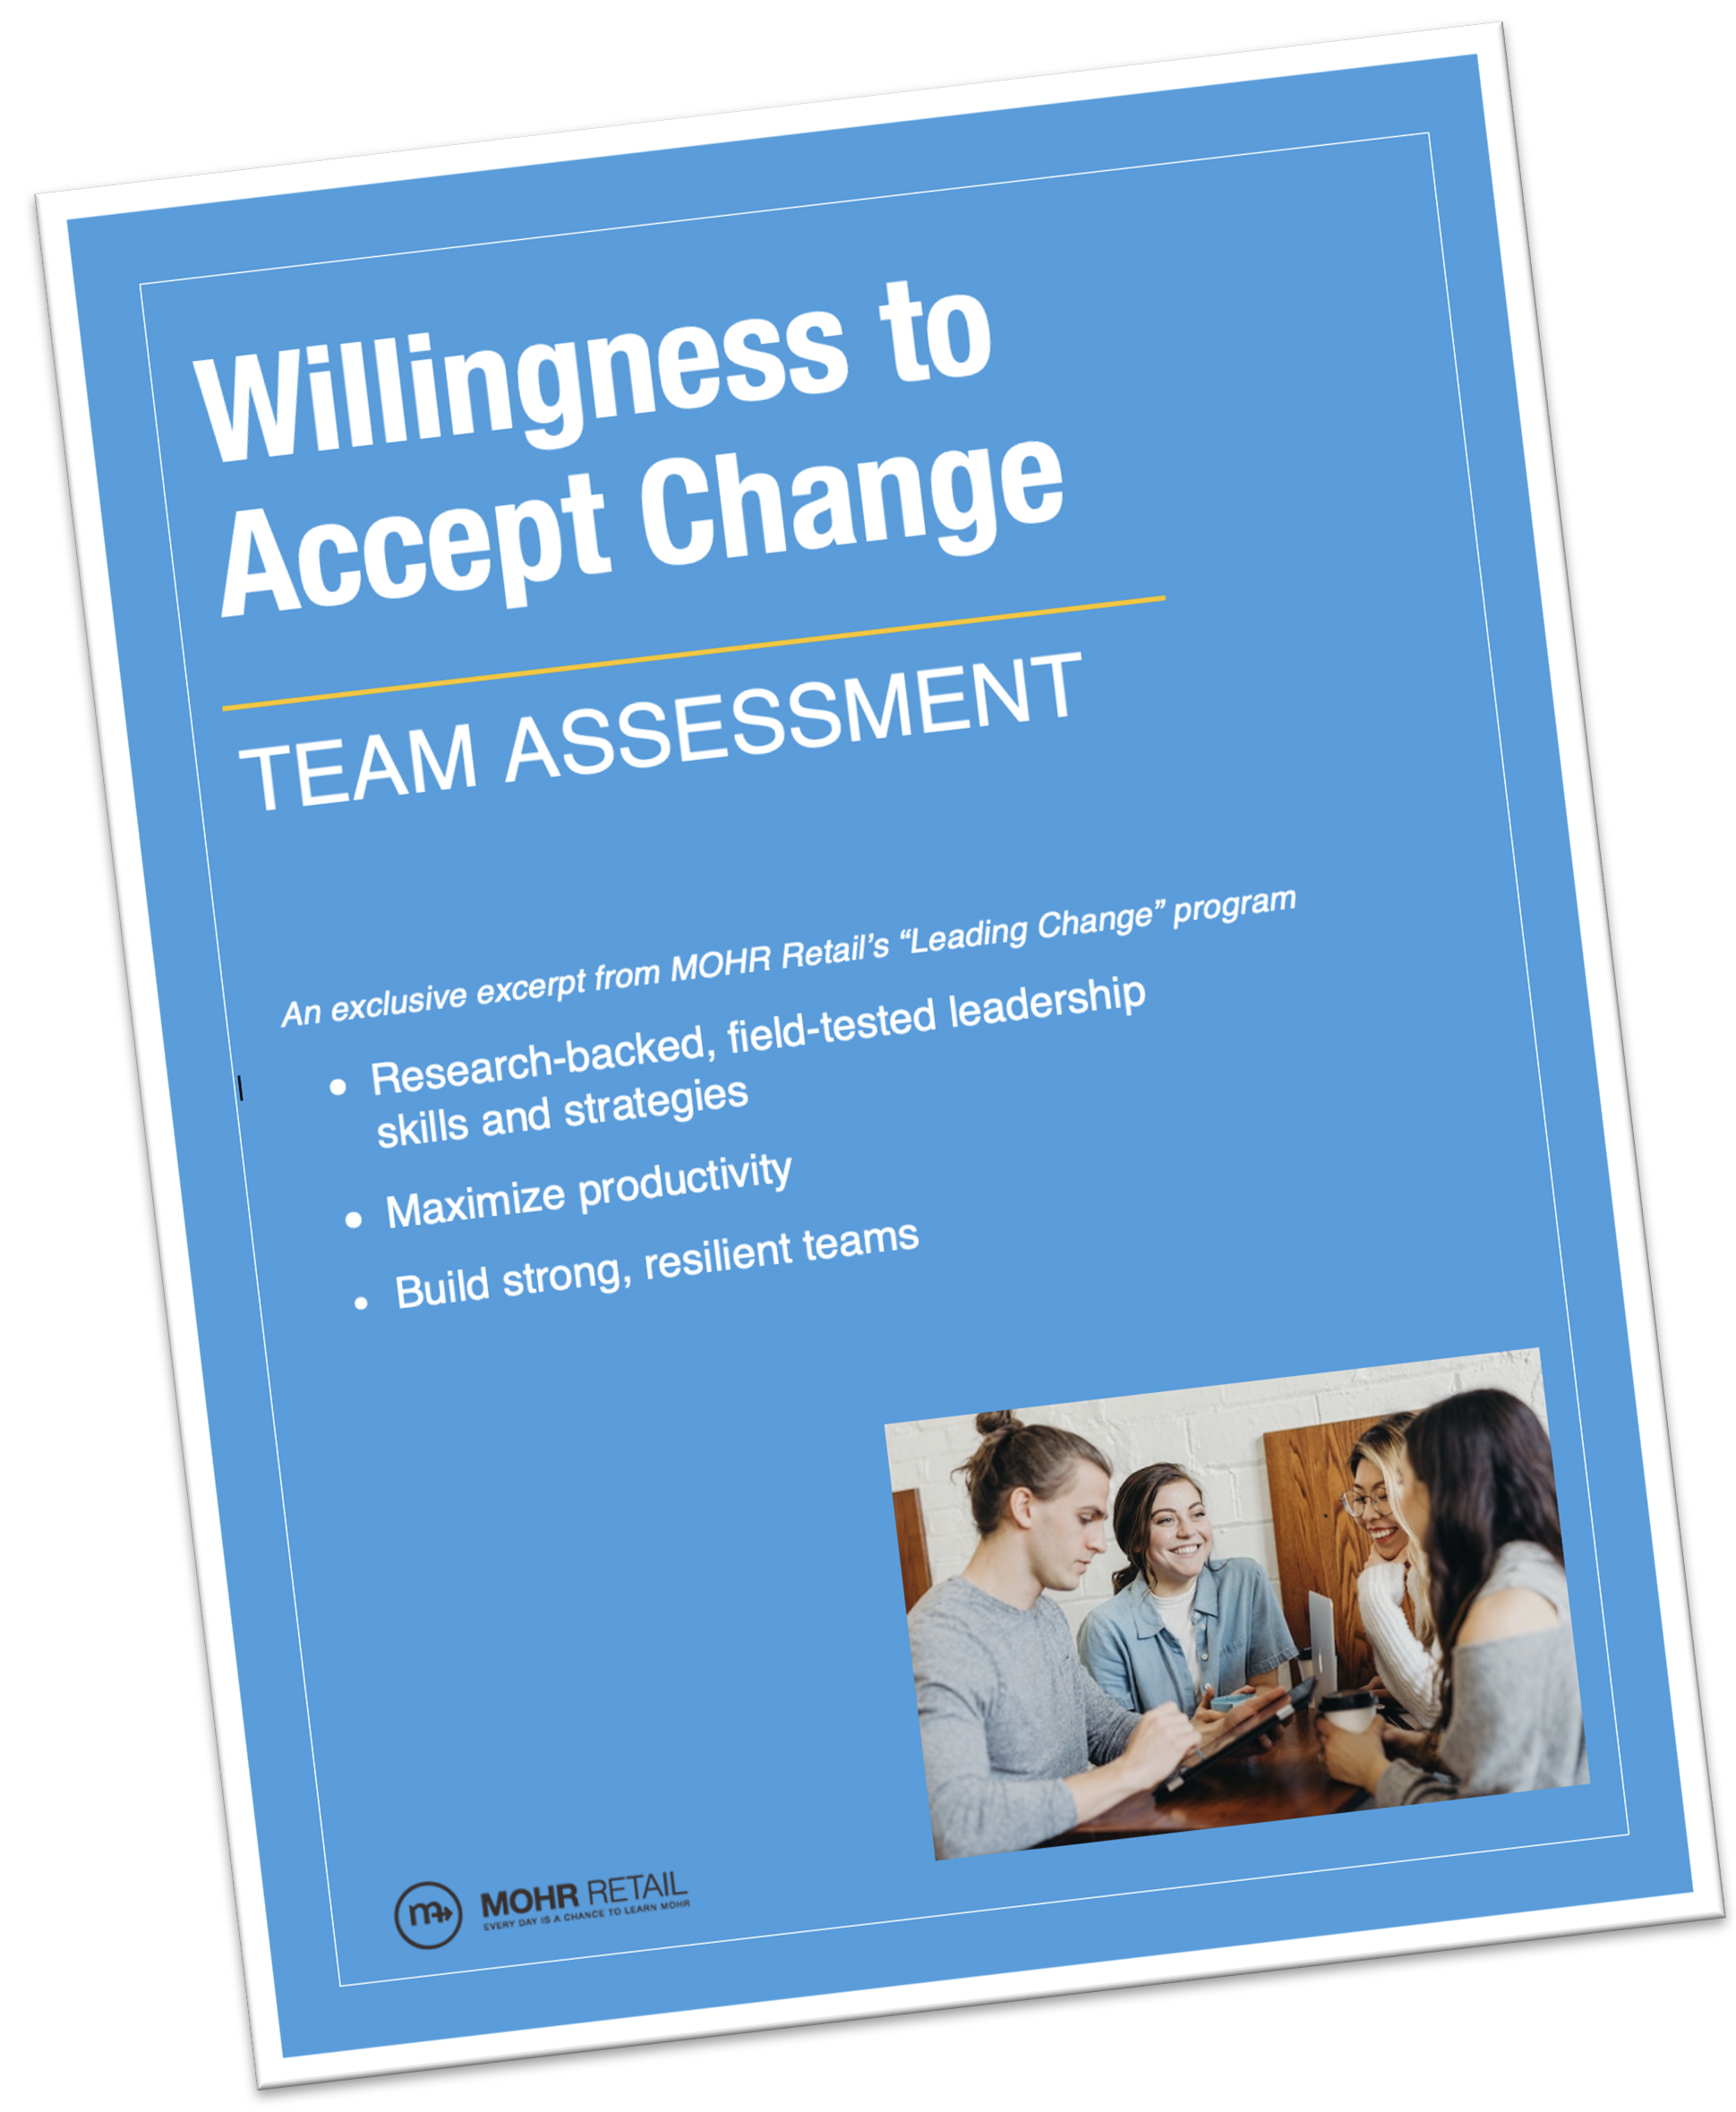 willingness-to-change-team-assessment.png